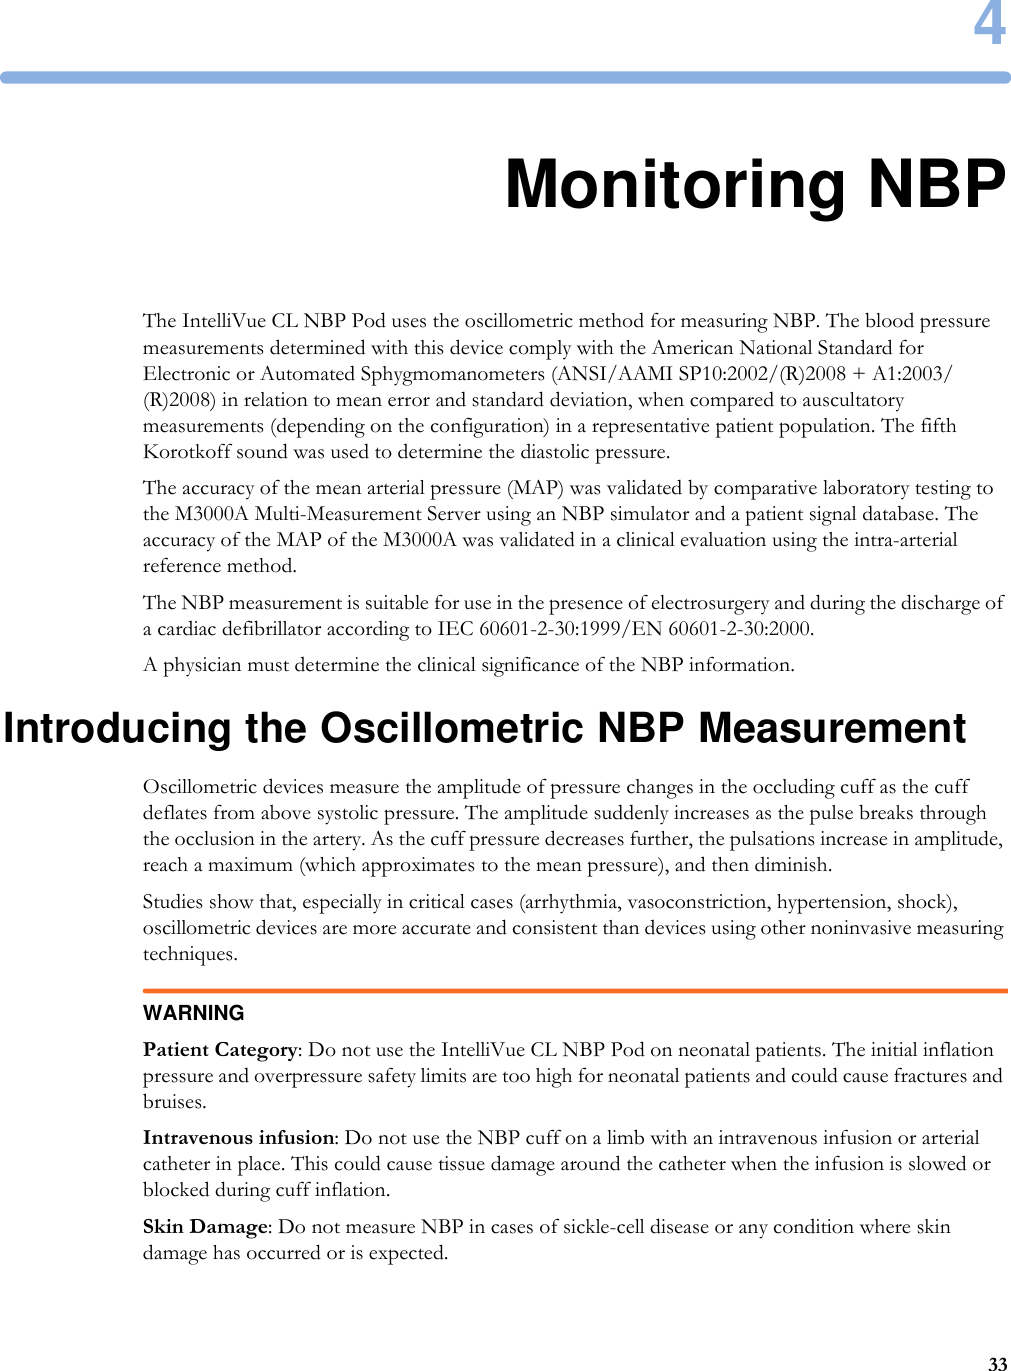 4334Monitoring NBPThe IntelliVue CL NBP Pod uses the oscillometric method for measuring NBP. The blood pressure measurements determined with this device comply with the American National Standard for Electronic or Automated Sphygmomanometers (ANSI/AAMI SP10:2002/(R)2008 + A1:2003/(R)2008) in relation to mean error and standard deviation, when compared to auscultatory measurements (depending on the configuration) in a representative patient population. The fifth Korotkoff sound was used to determine the diastolic pressure.The accuracy of the mean arterial pressure (MAP) was validated by comparative laboratory testing to the M3000A Multi-Measurement Server using an NBP simulator and a patient signal database. The accuracy of the MAP of the M3000A was validated in a clinical evaluation using the intra-arterial reference method. The NBP measurement is suitable for use in the presence of electrosurgery and during the discharge of a cardiac defibrillator according to IEC 60601-2-30:1999/EN 60601-2-30:2000.A physician must determine the clinical significance of the NBP information.Introducing the Oscillometric NBP MeasurementOscillometric devices measure the amplitude of pressure changes in the occluding cuff as the cuff deflates from above systolic pressure. The amplitude suddenly increases as the pulse breaks through the occlusion in the artery. As the cuff pressure decreases further, the pulsations increase in amplitude, reach a maximum (which approximates to the mean pressure), and then diminish.Studies show that, especially in critical cases (arrhythmia, vasoconstriction, hypertension, shock), oscillometric devices are more accurate and consistent than devices using other noninvasive measuring techniques.WARNINGPatient Category: Do not use the IntelliVue CL NBP Pod on neonatal patients. The initial inflation pressure and overpressure safety limits are too high for neonatal patients and could cause fractures and bruises.Intravenous infusion: Do not use the NBP cuff on a limb with an intravenous infusion or arterial catheter in place. This could cause tissue damage around the catheter when the infusion is slowed or blocked during cuff inflation.Skin Damage: Do not measure NBP in cases of sickle-cell disease or any condition where skin damage has occurred or is expected.